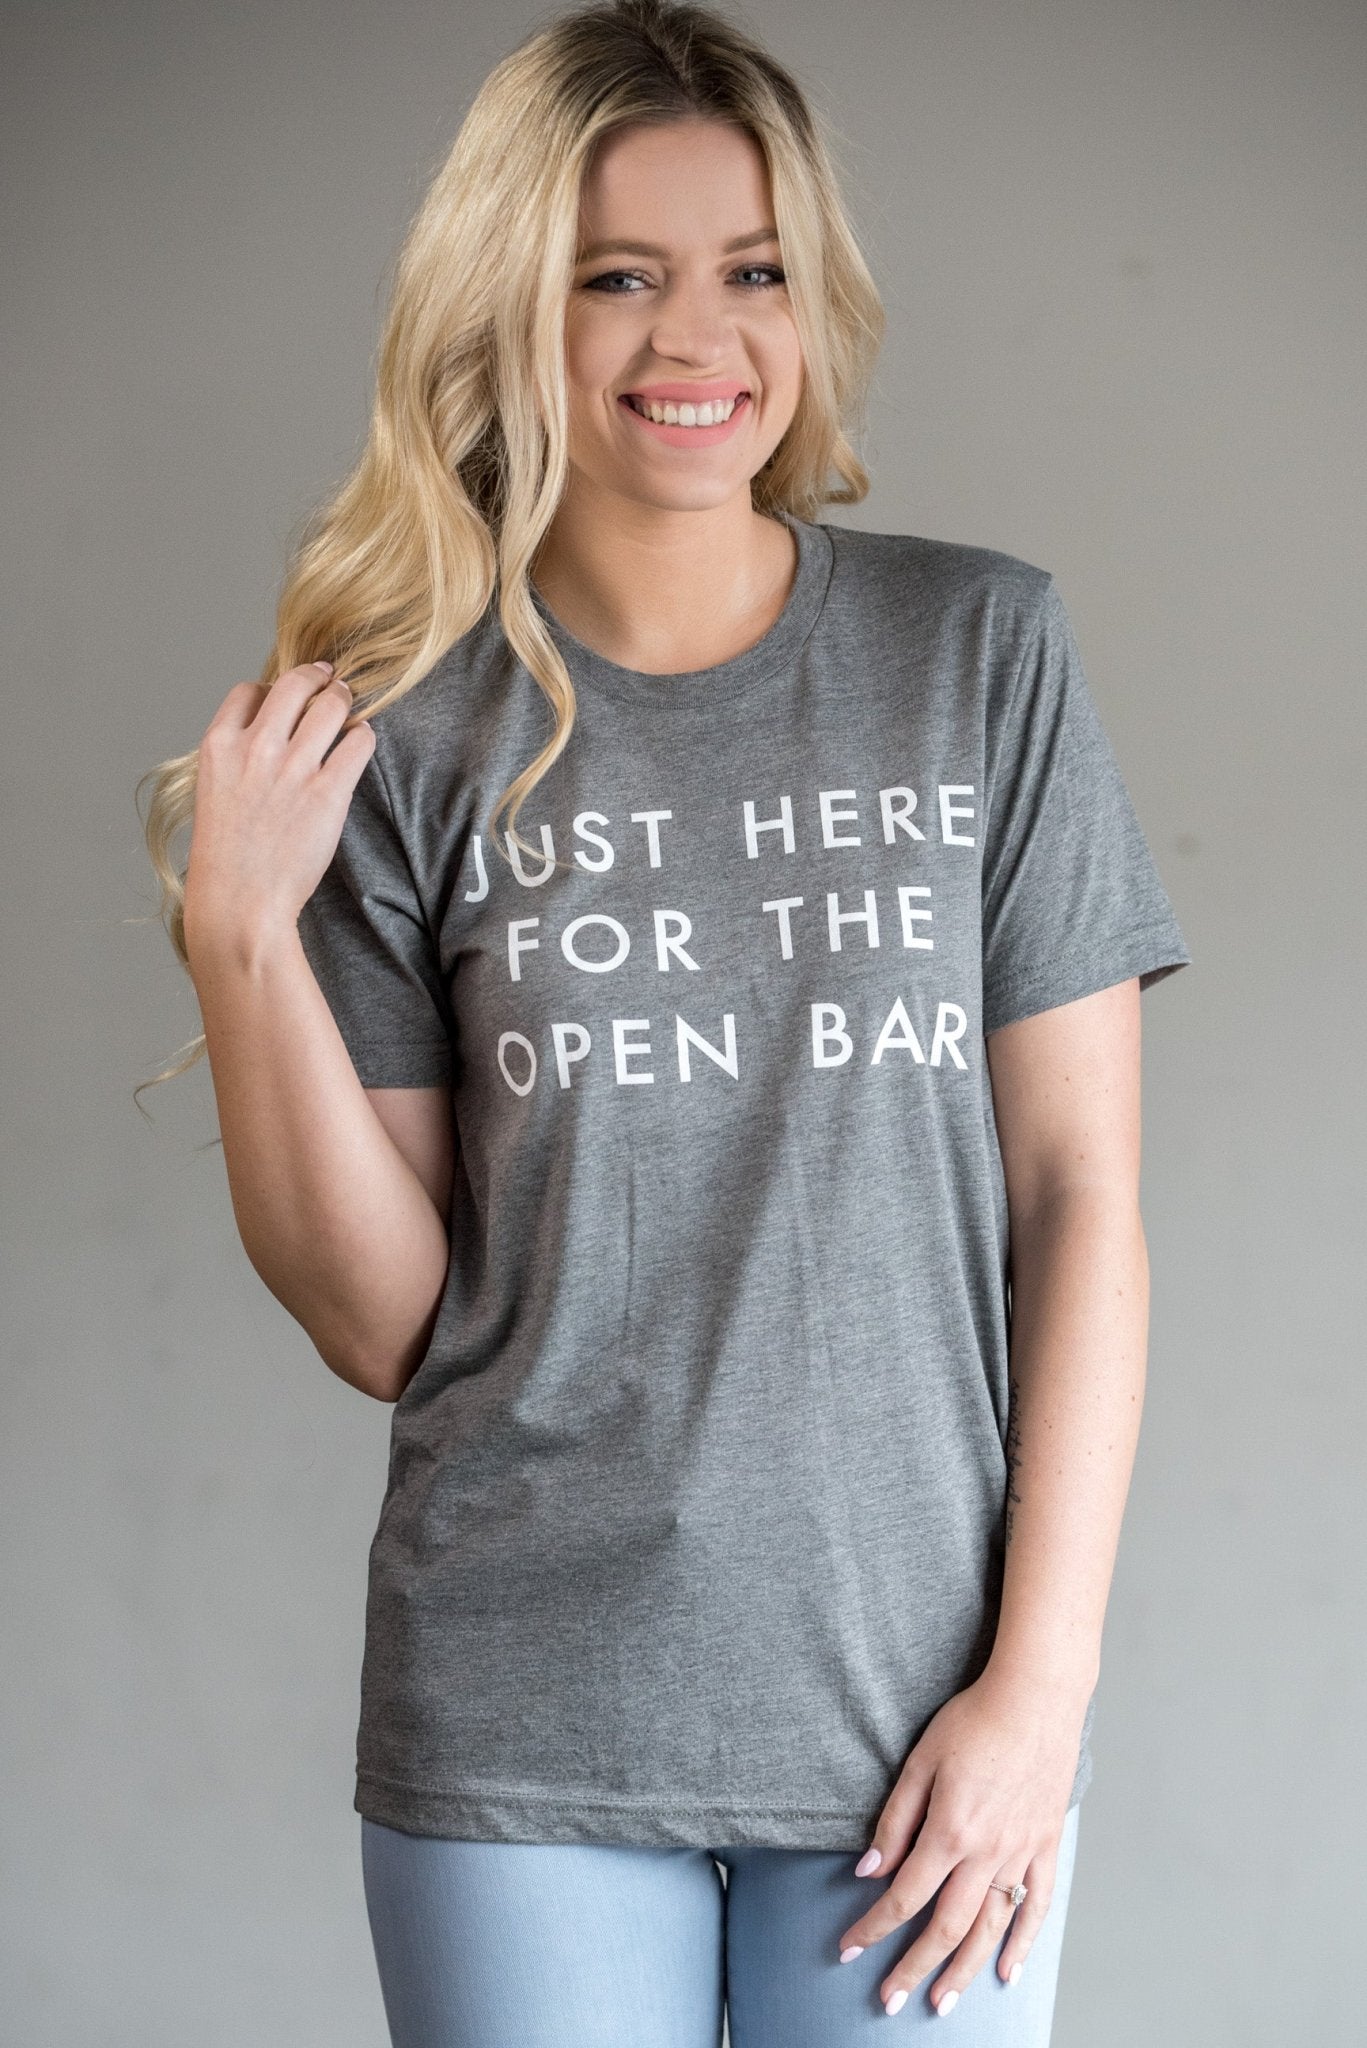 Just here for the open bar unisex short sleeve crew neck t-shirt grey - Stylish T-shirts - Trendy Graphic T-Shirts and Tank Tops at Lush Fashion Lounge Boutique in Oklahoma City